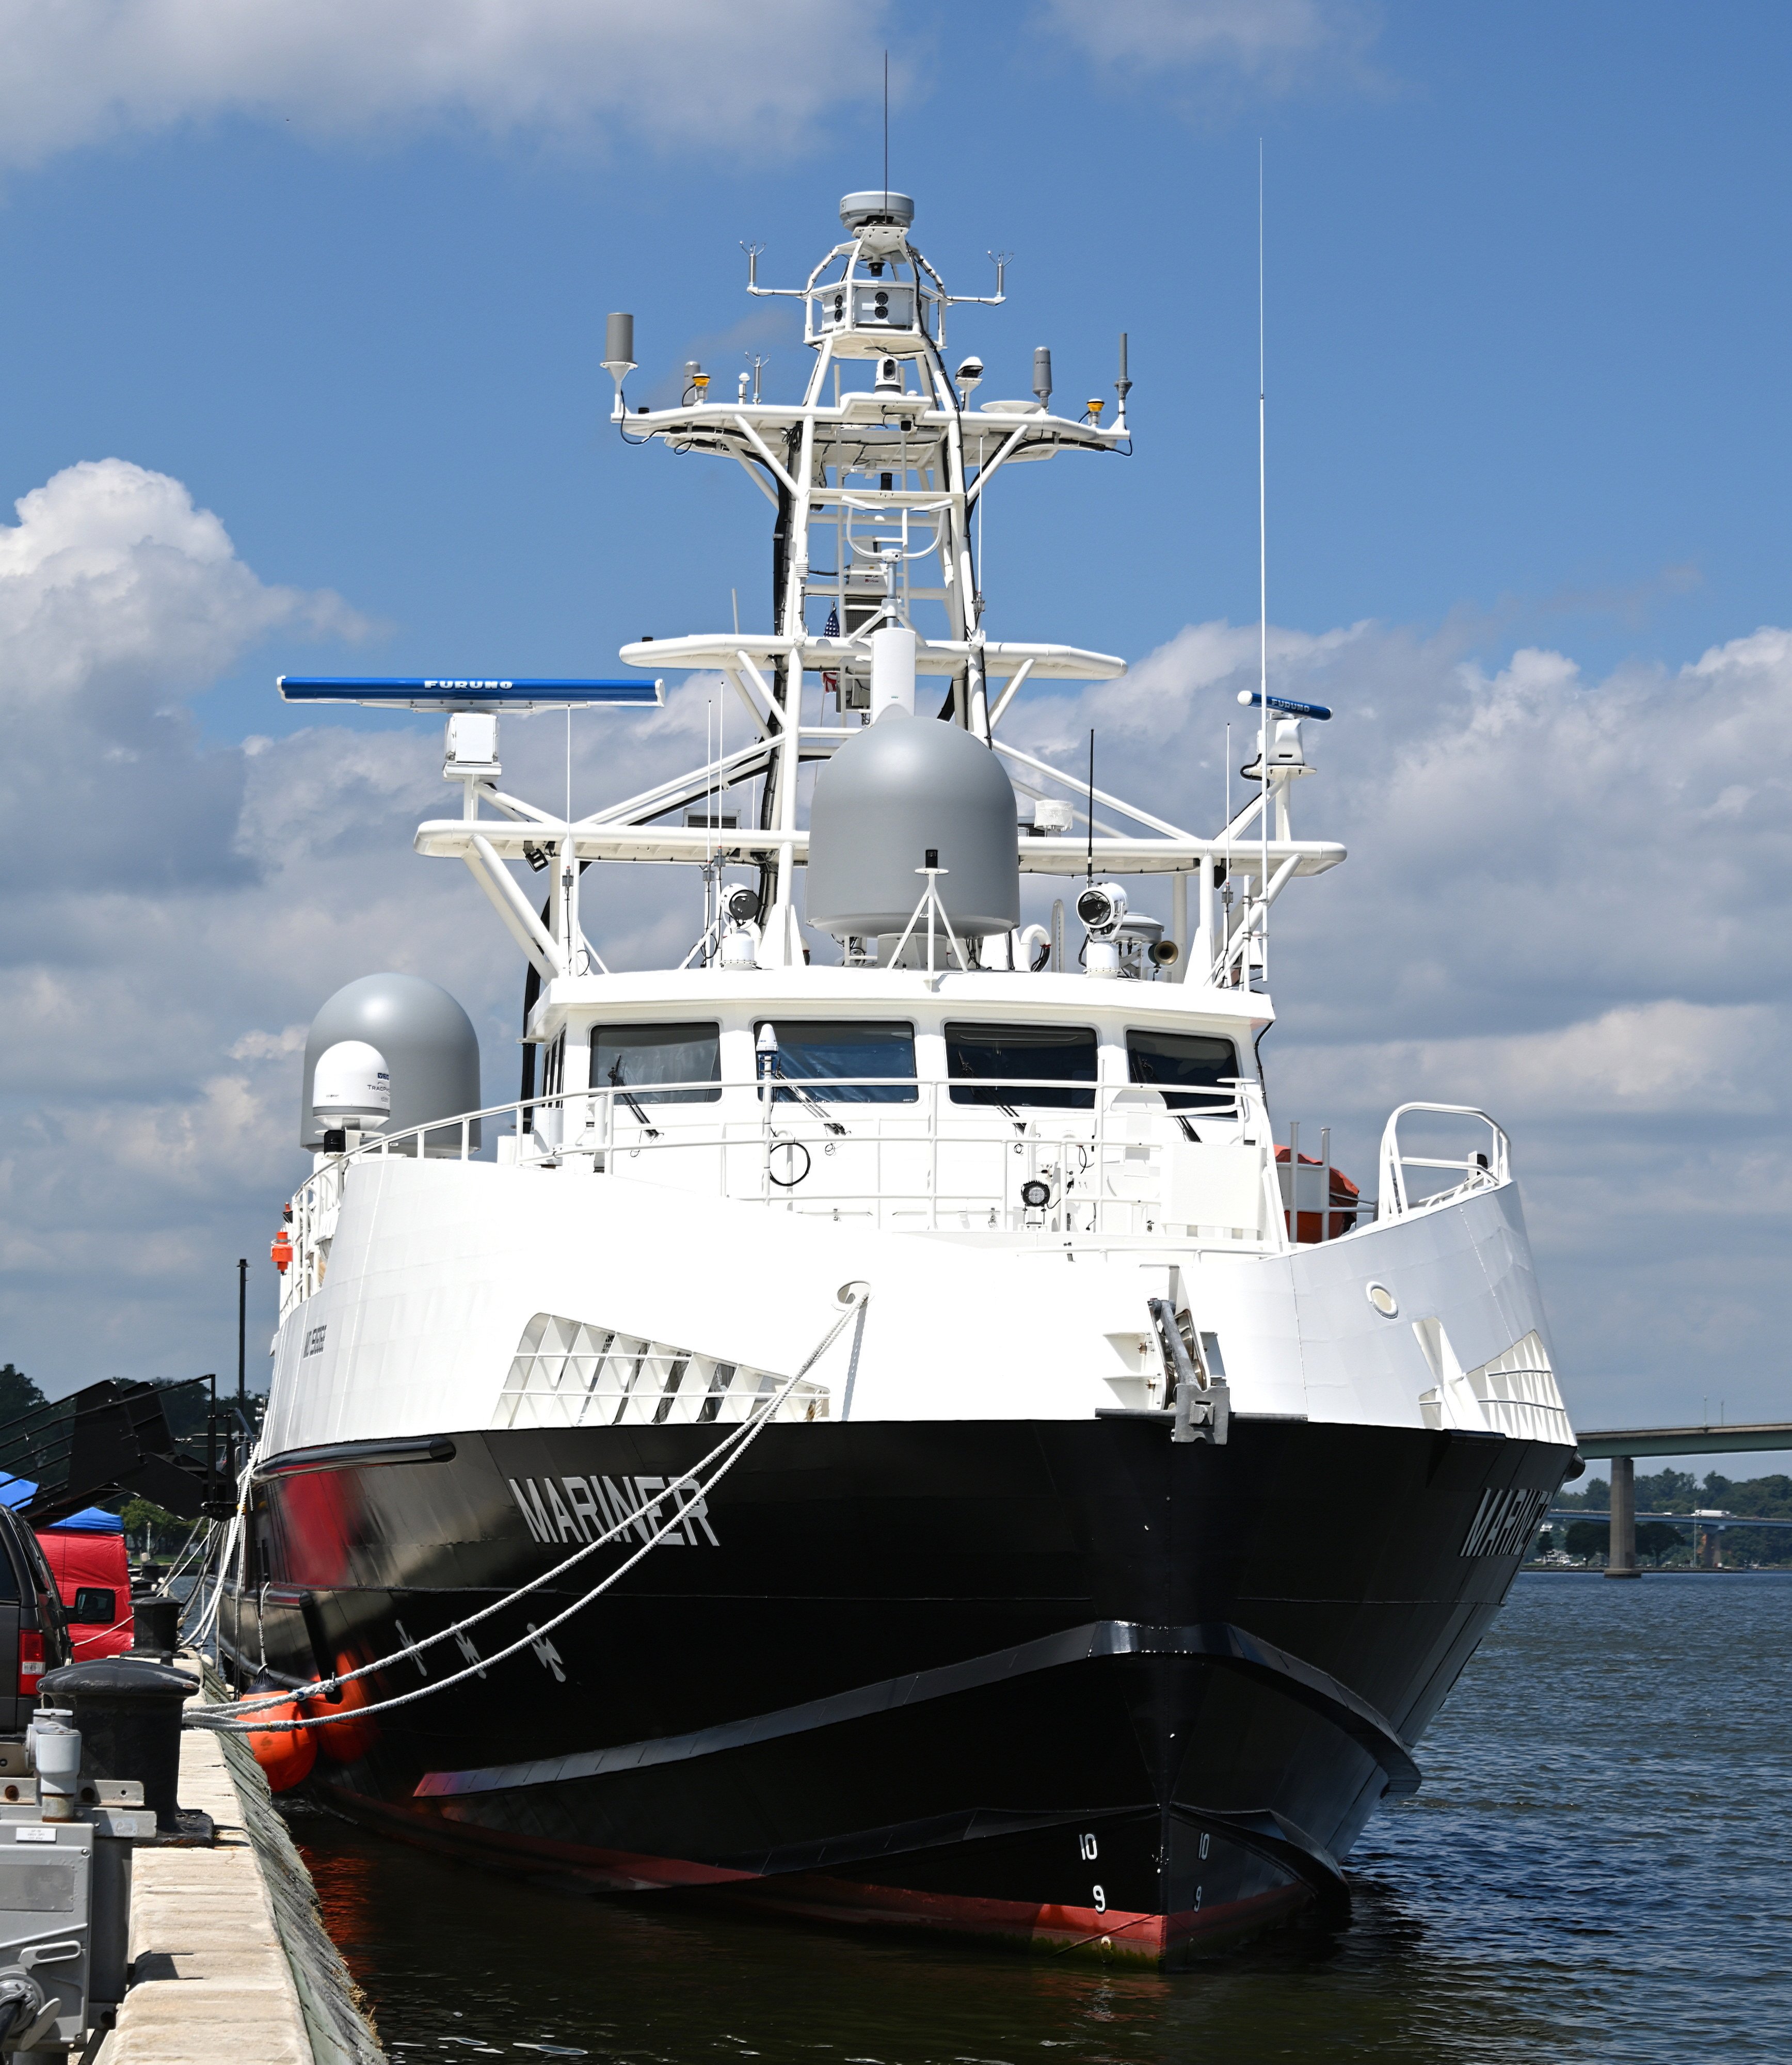 The US Navy’s Mariner is a test vessel for the service’s manned/unmanned ship programme. Photo: Twitter